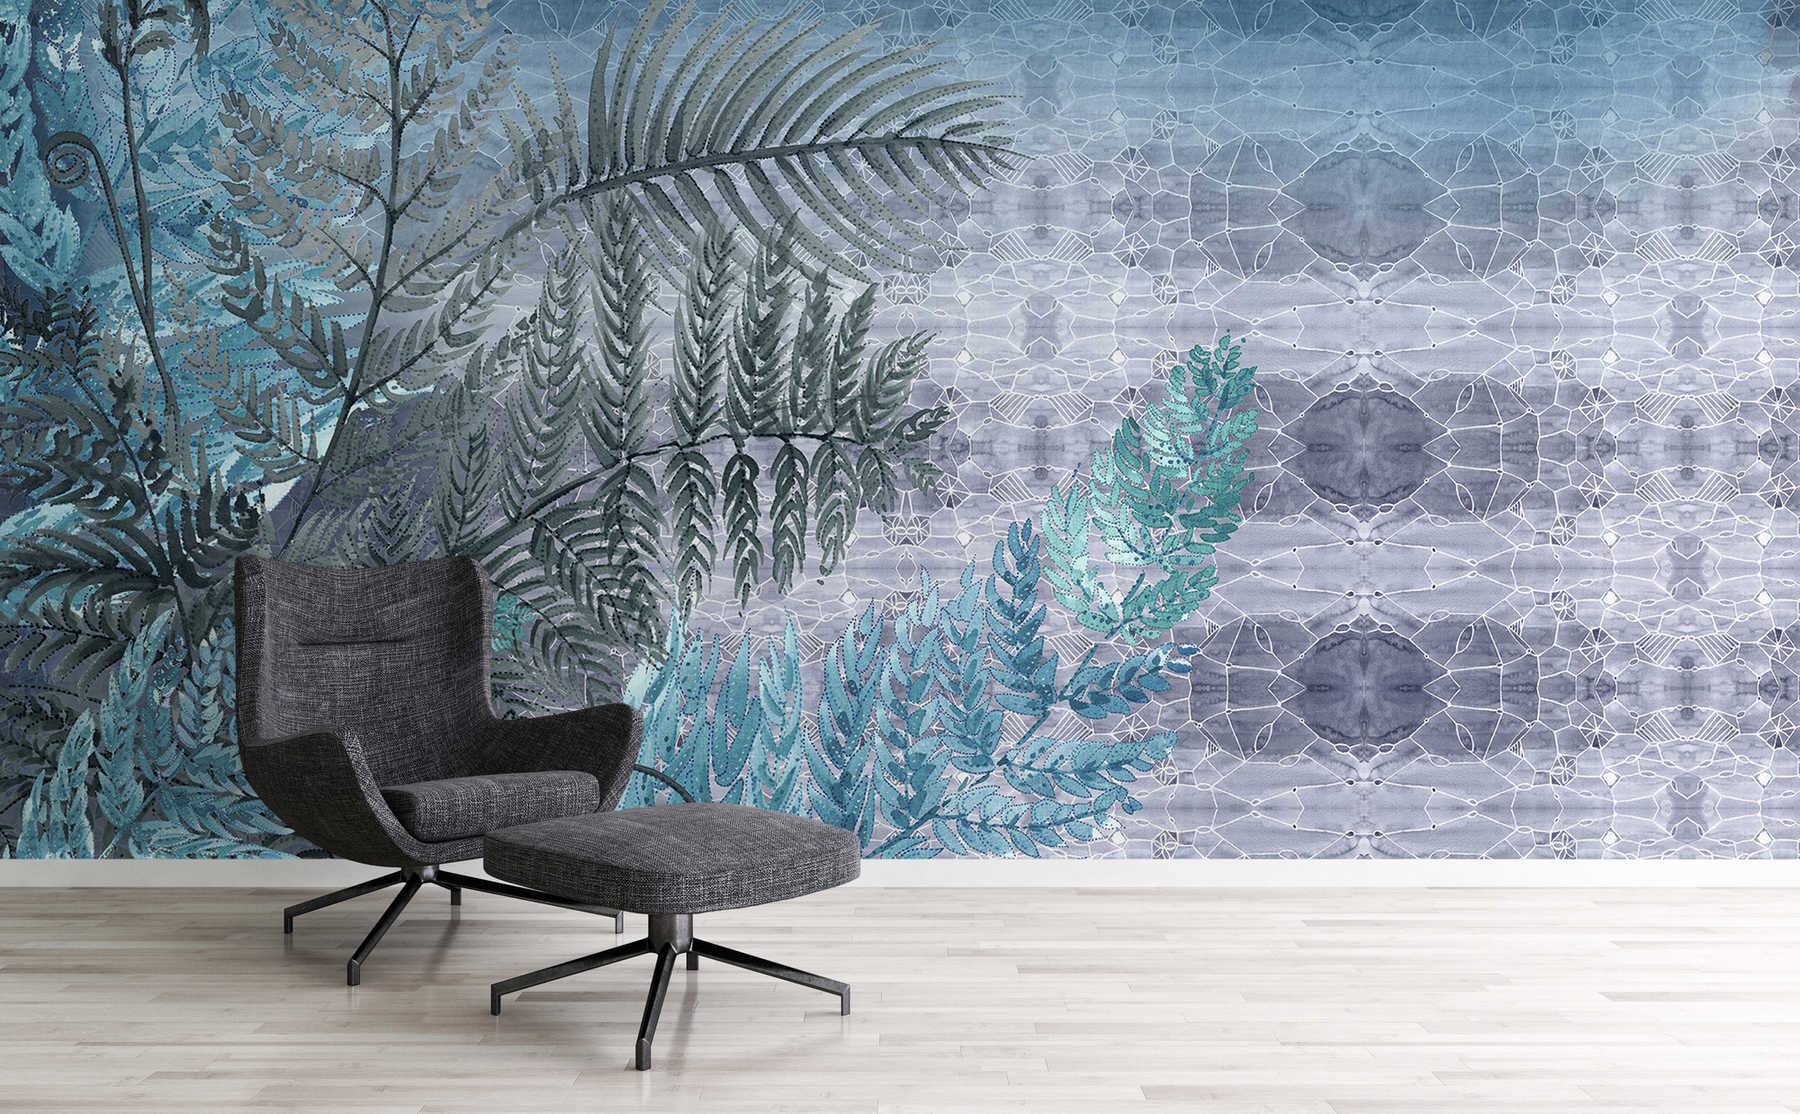             Watercolour photo wallpaper fern pattern in blue and purple on textured non-woven
        